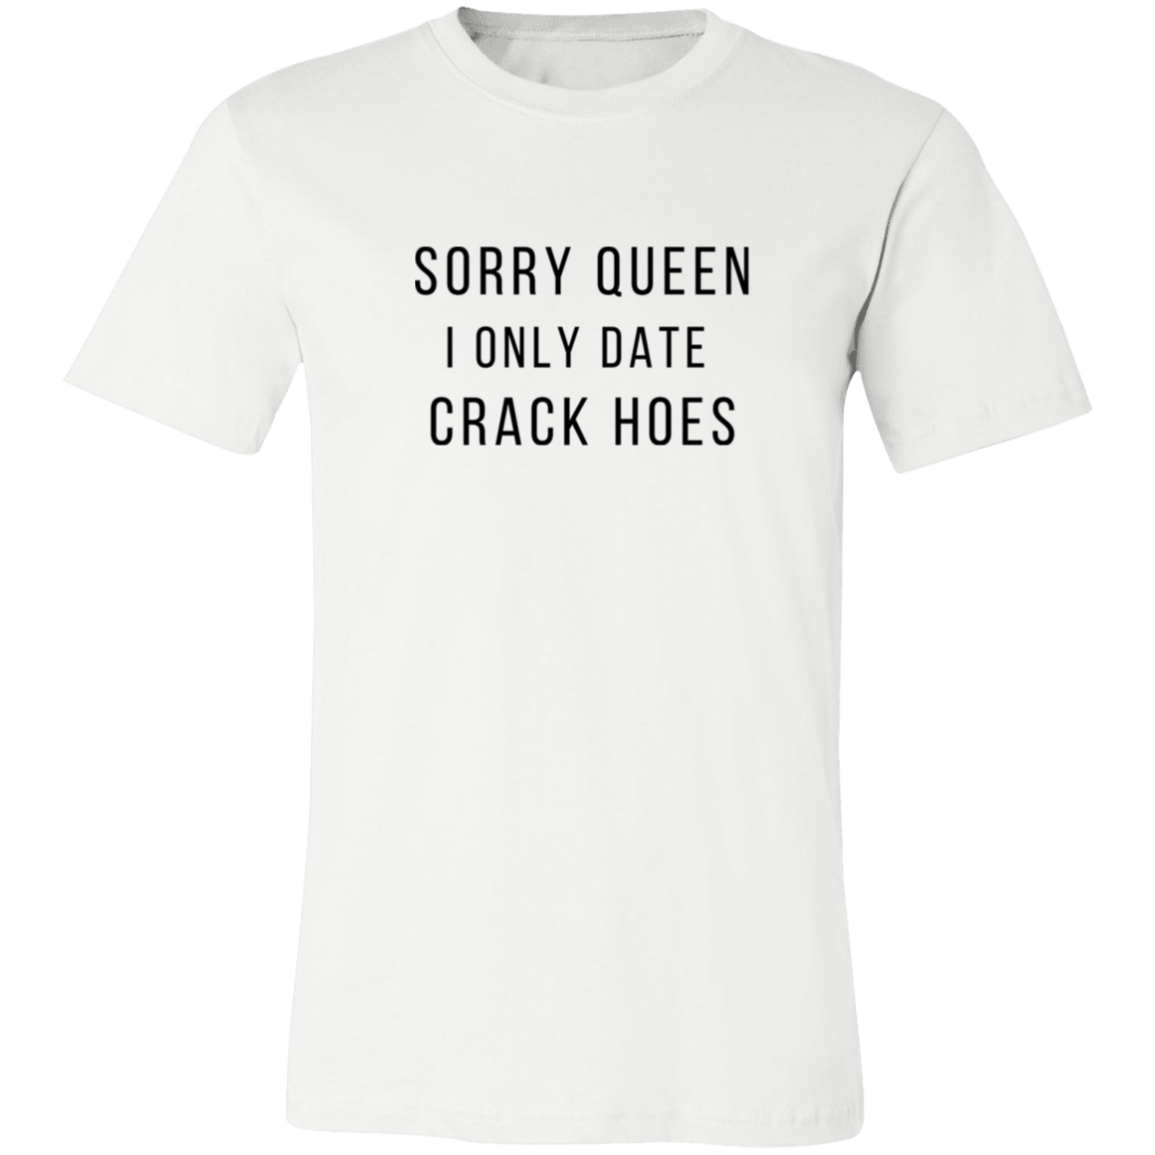 Sorry Queen I Only Date Crack Hoes Shirt